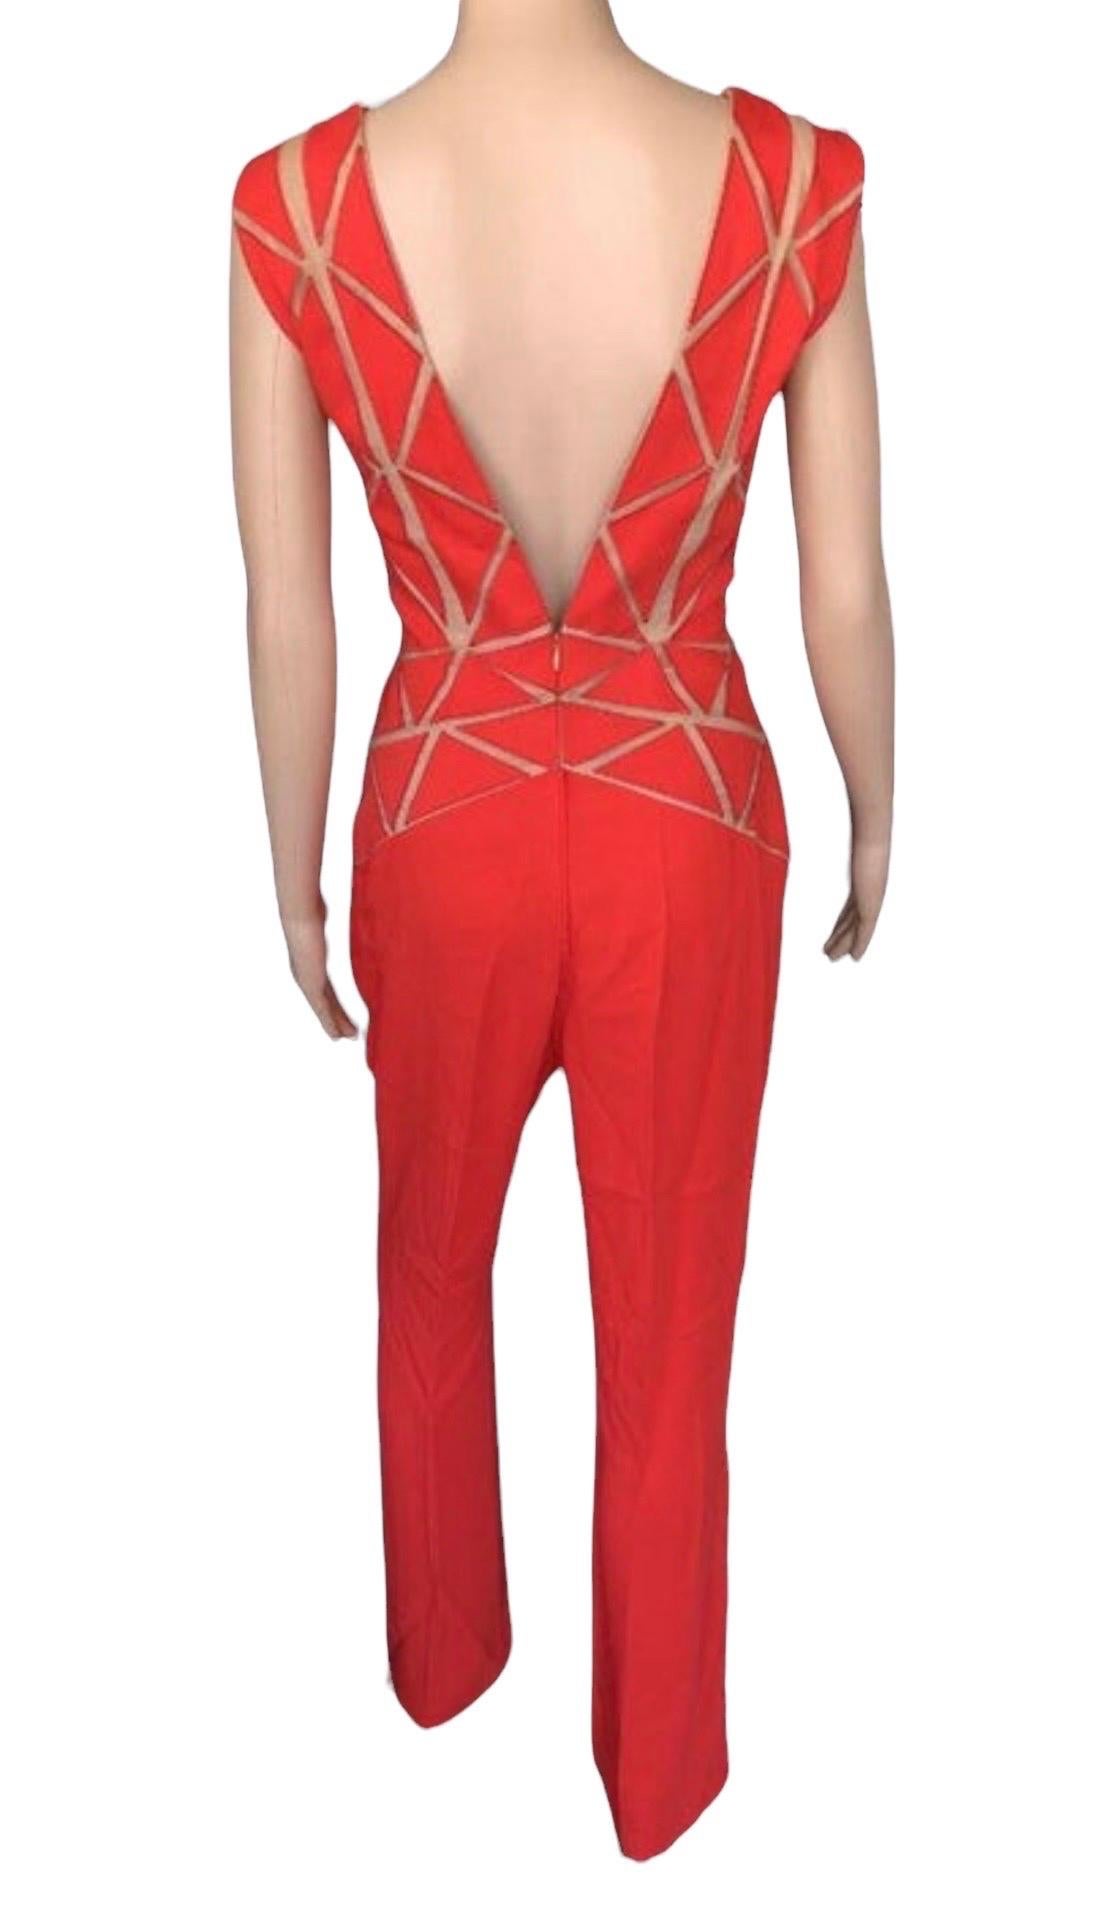 Women's Zuhair Murad Resort 2015 Runway Plunged Sheer Tulle Cutout Red Romper Jumpsuit For Sale